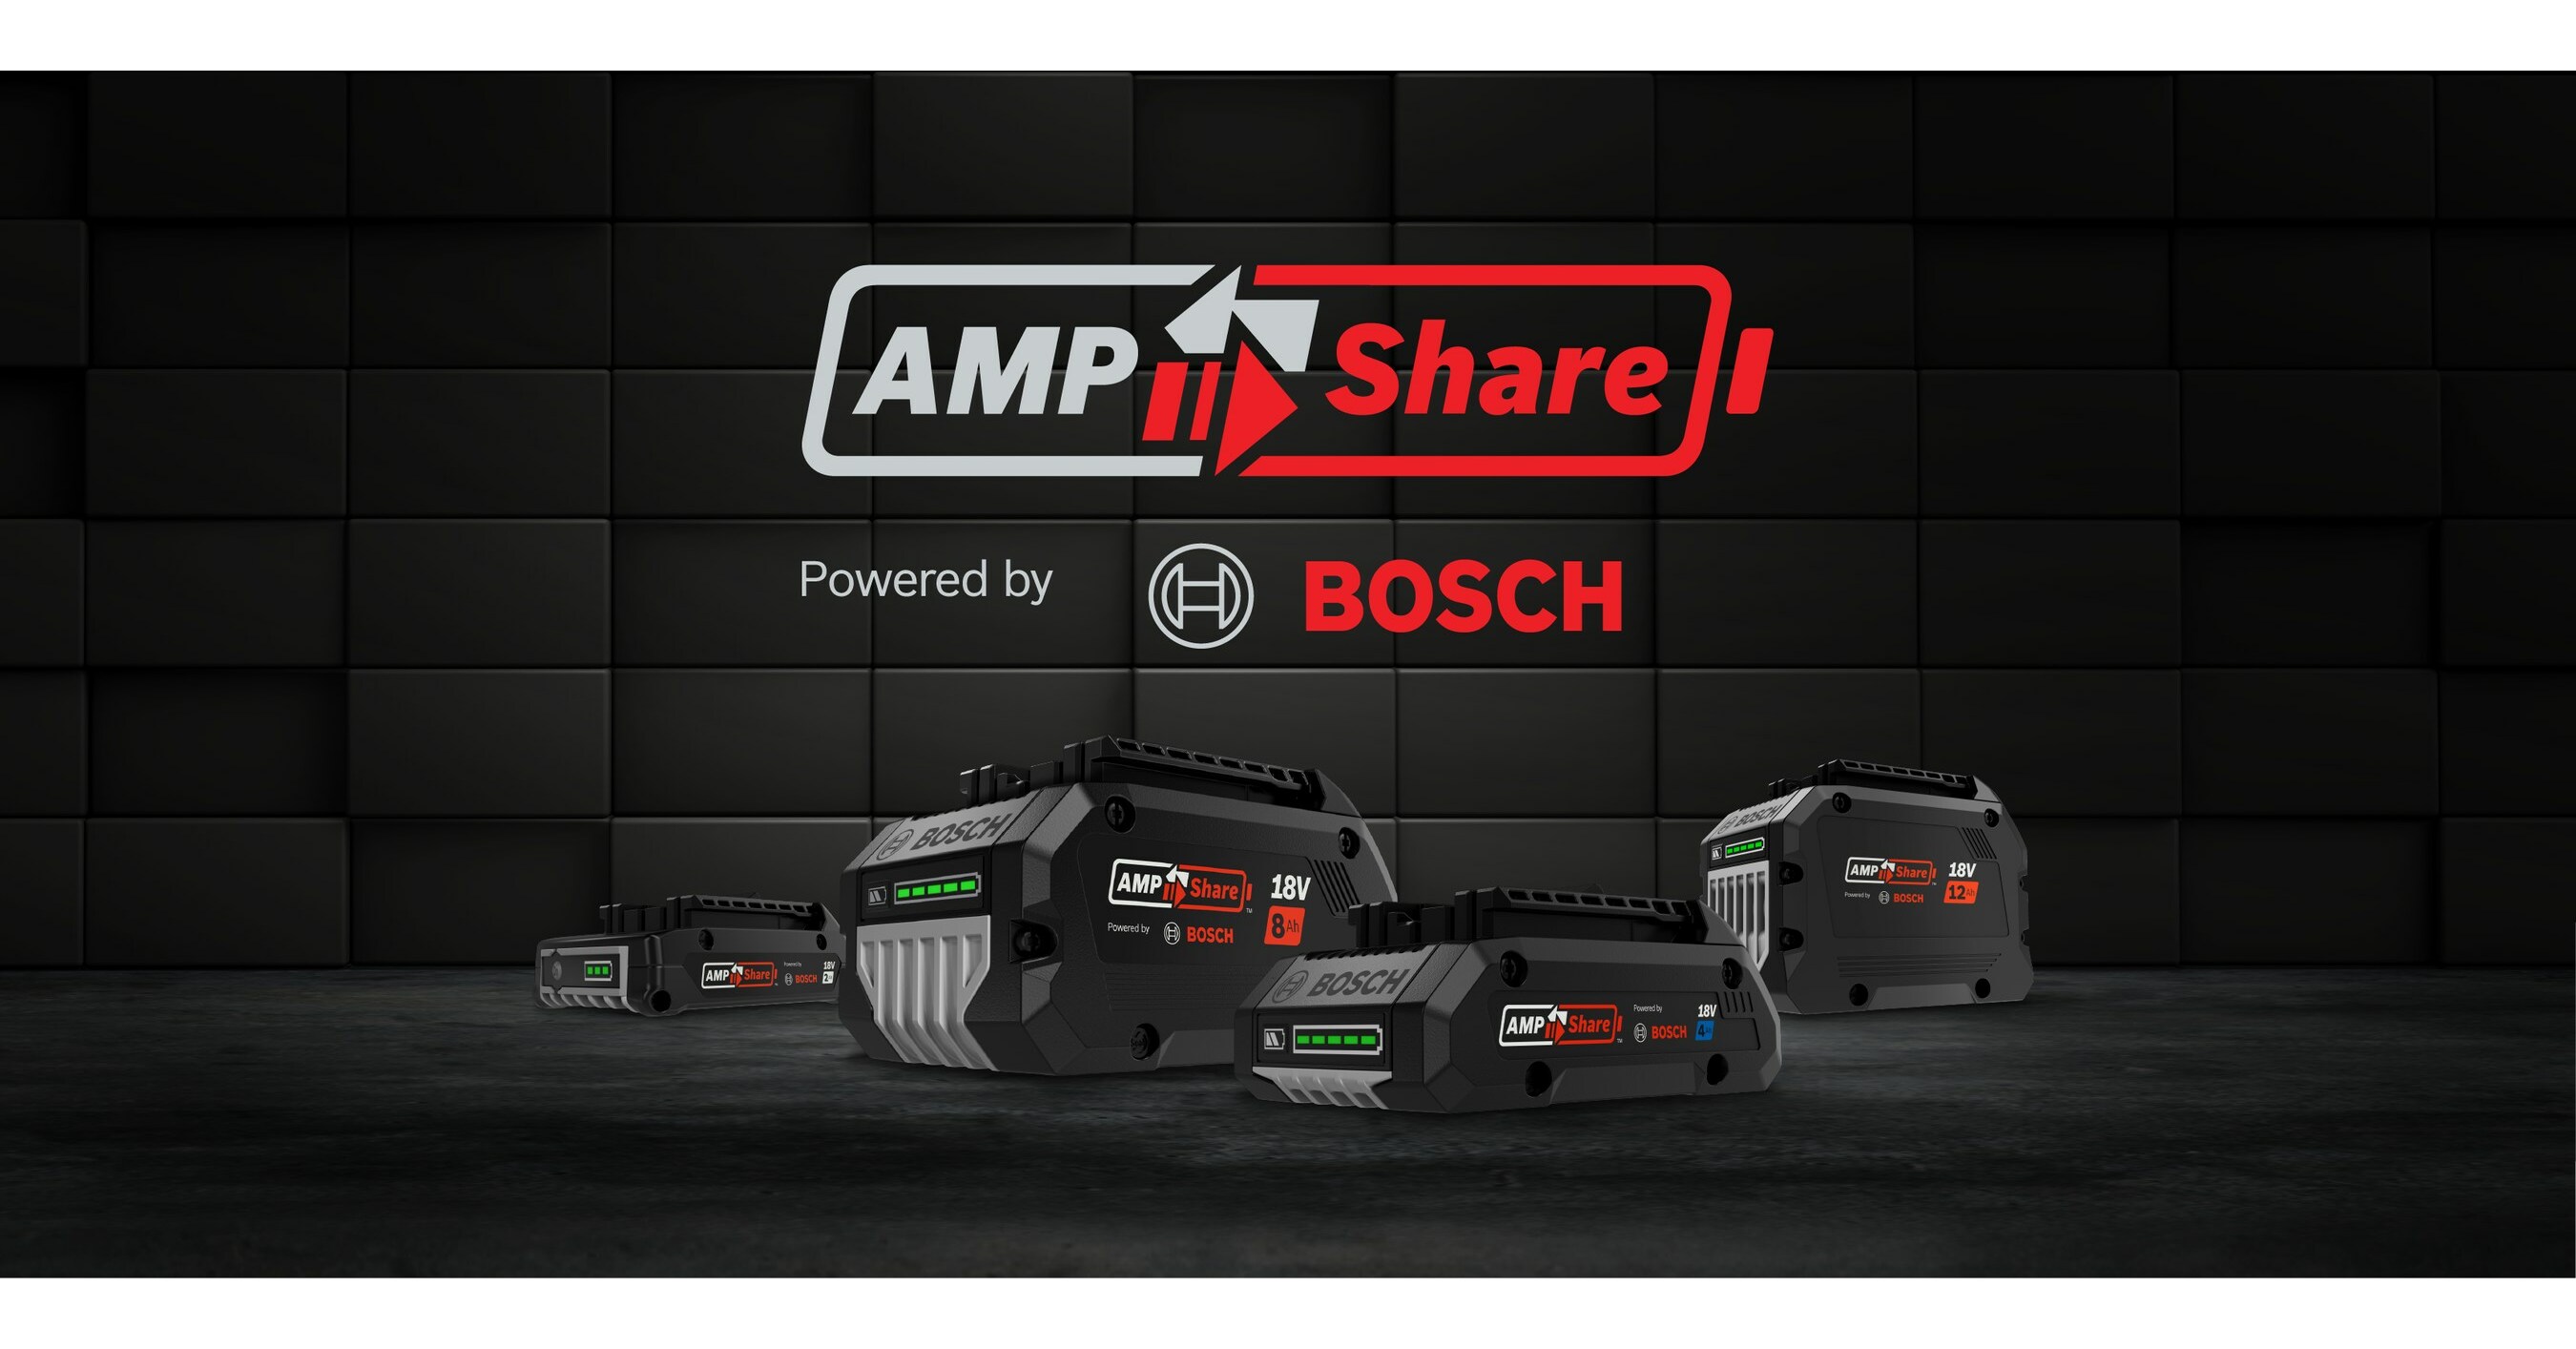 Simplifying the Jobsite for Workers with a Multi-Brand 18V Battery  Platform: AMPShare - Powered by Bosch Launches in the U.S. and Canada  Expanding Compatibility to Brands like FEIN and Rothenberger